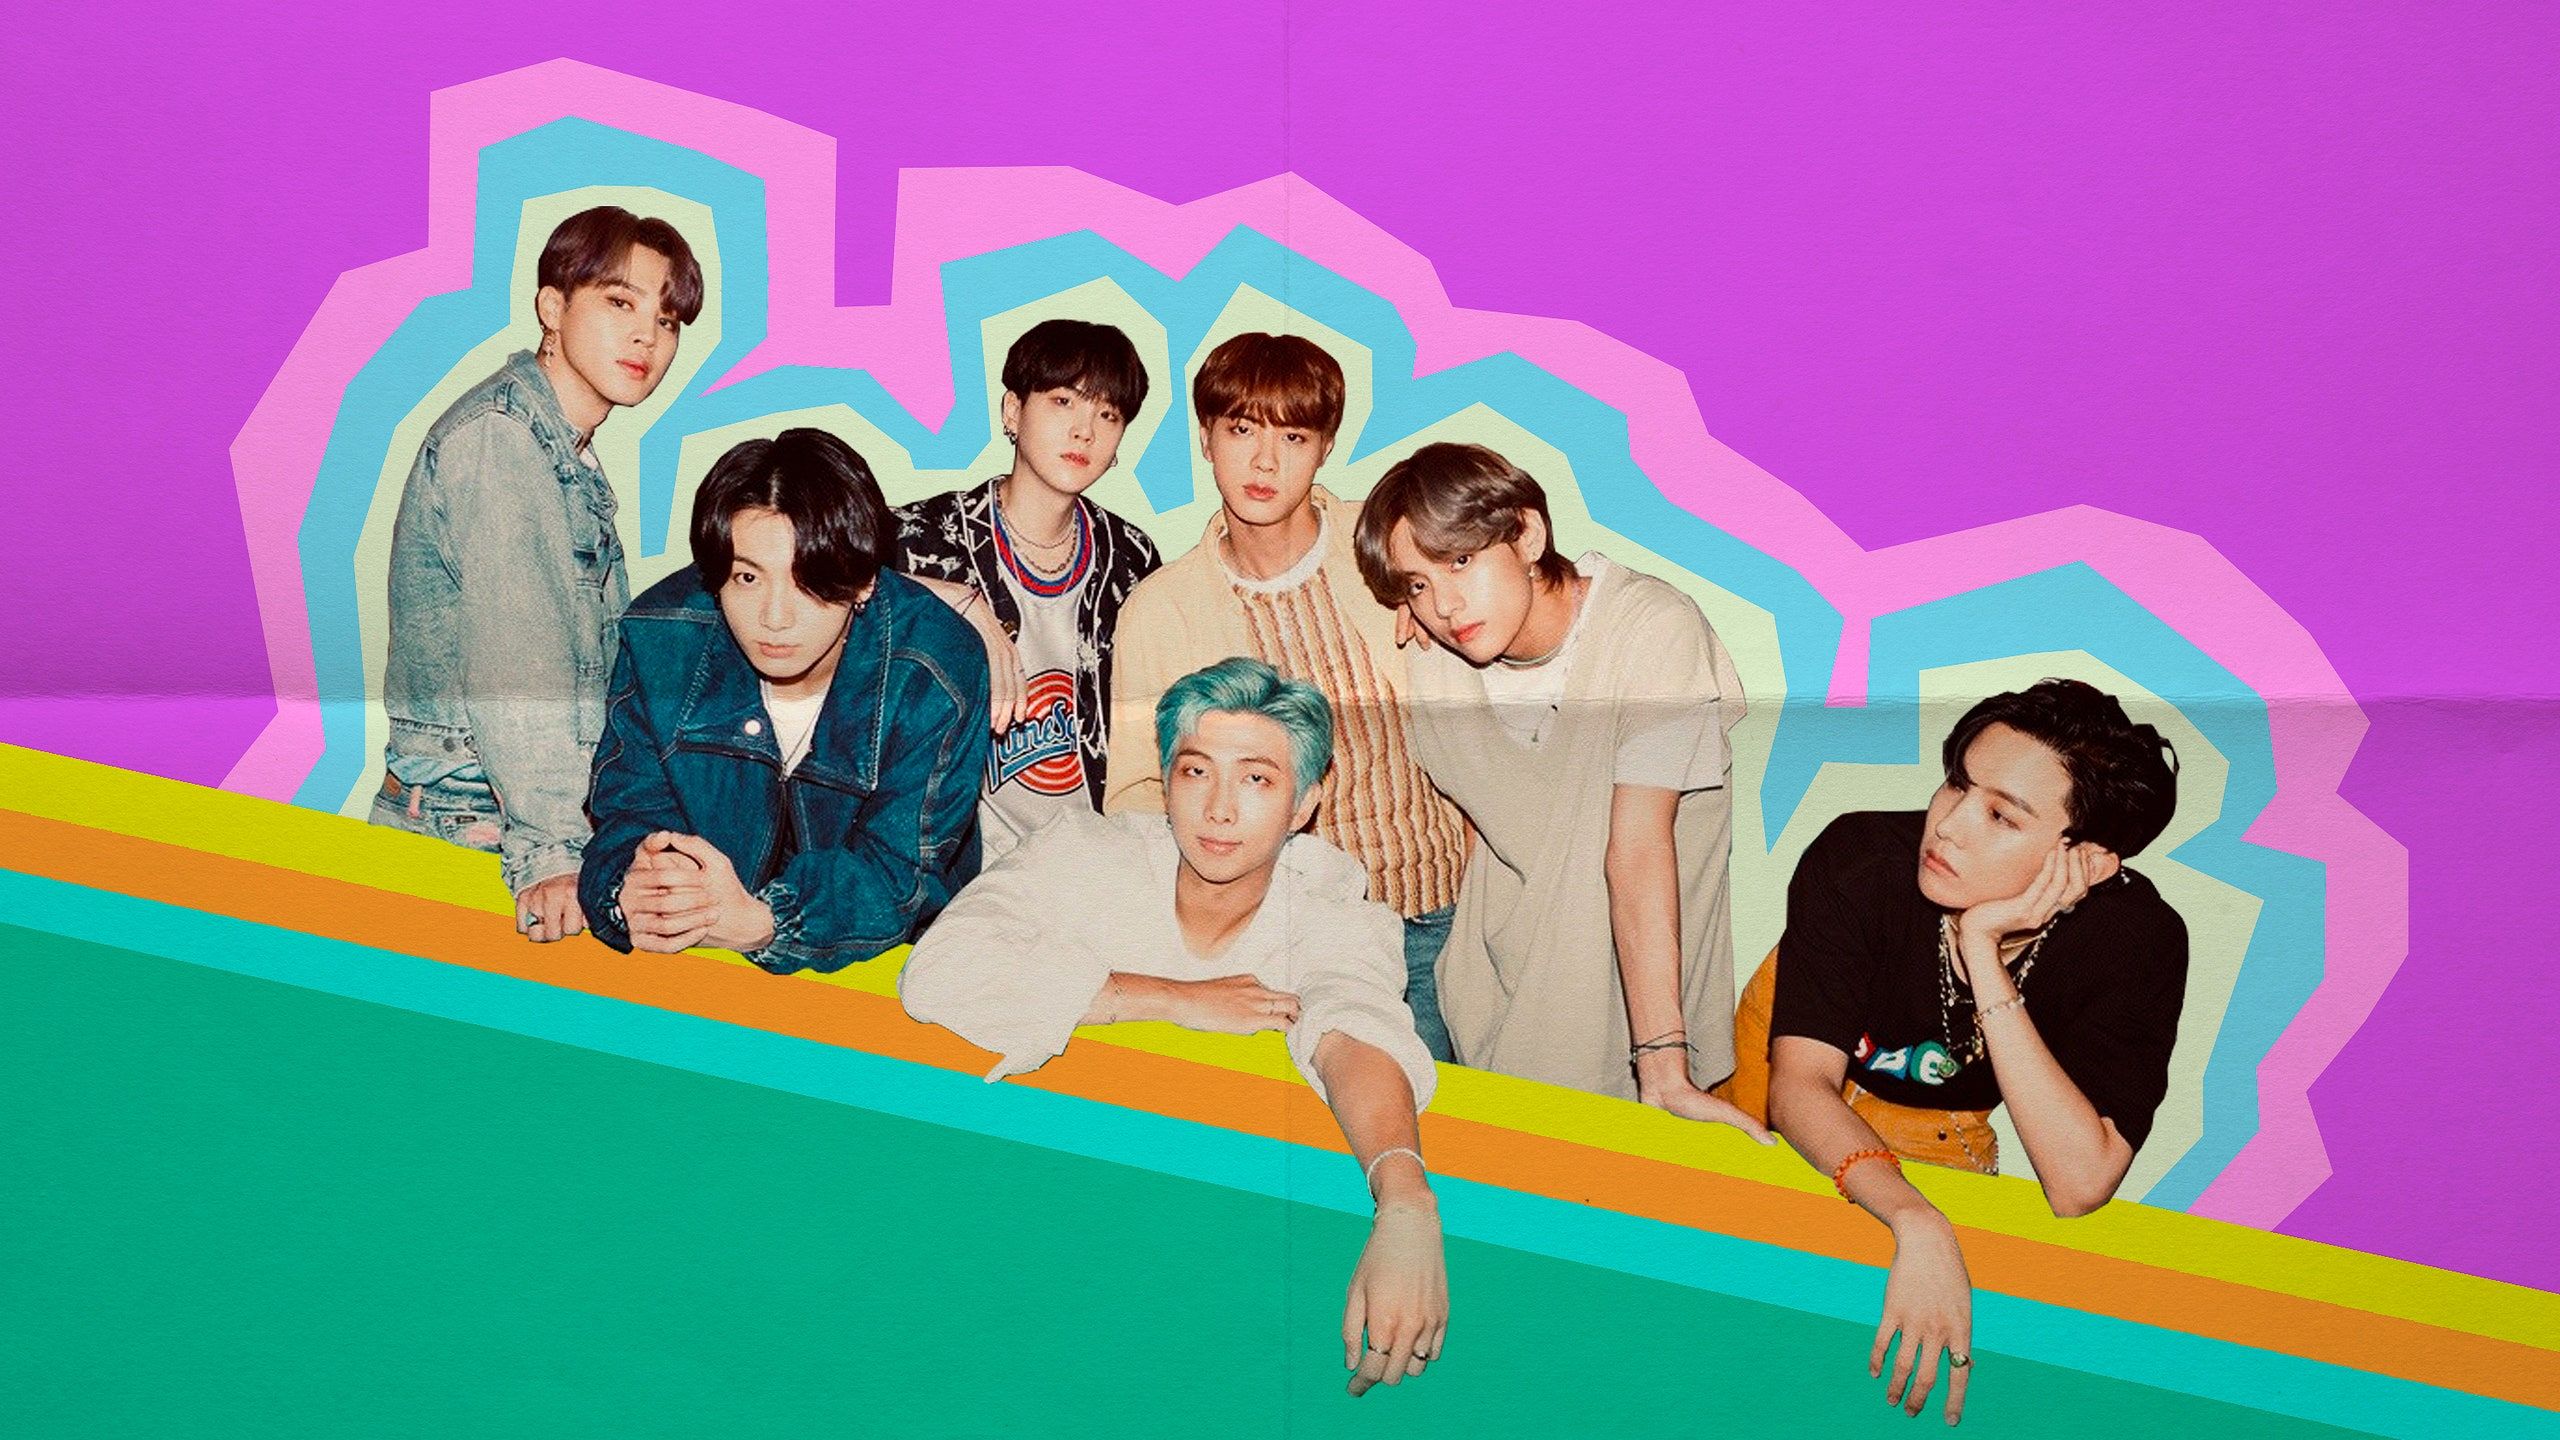 BTS Announces Forthcoming Album, “BE”